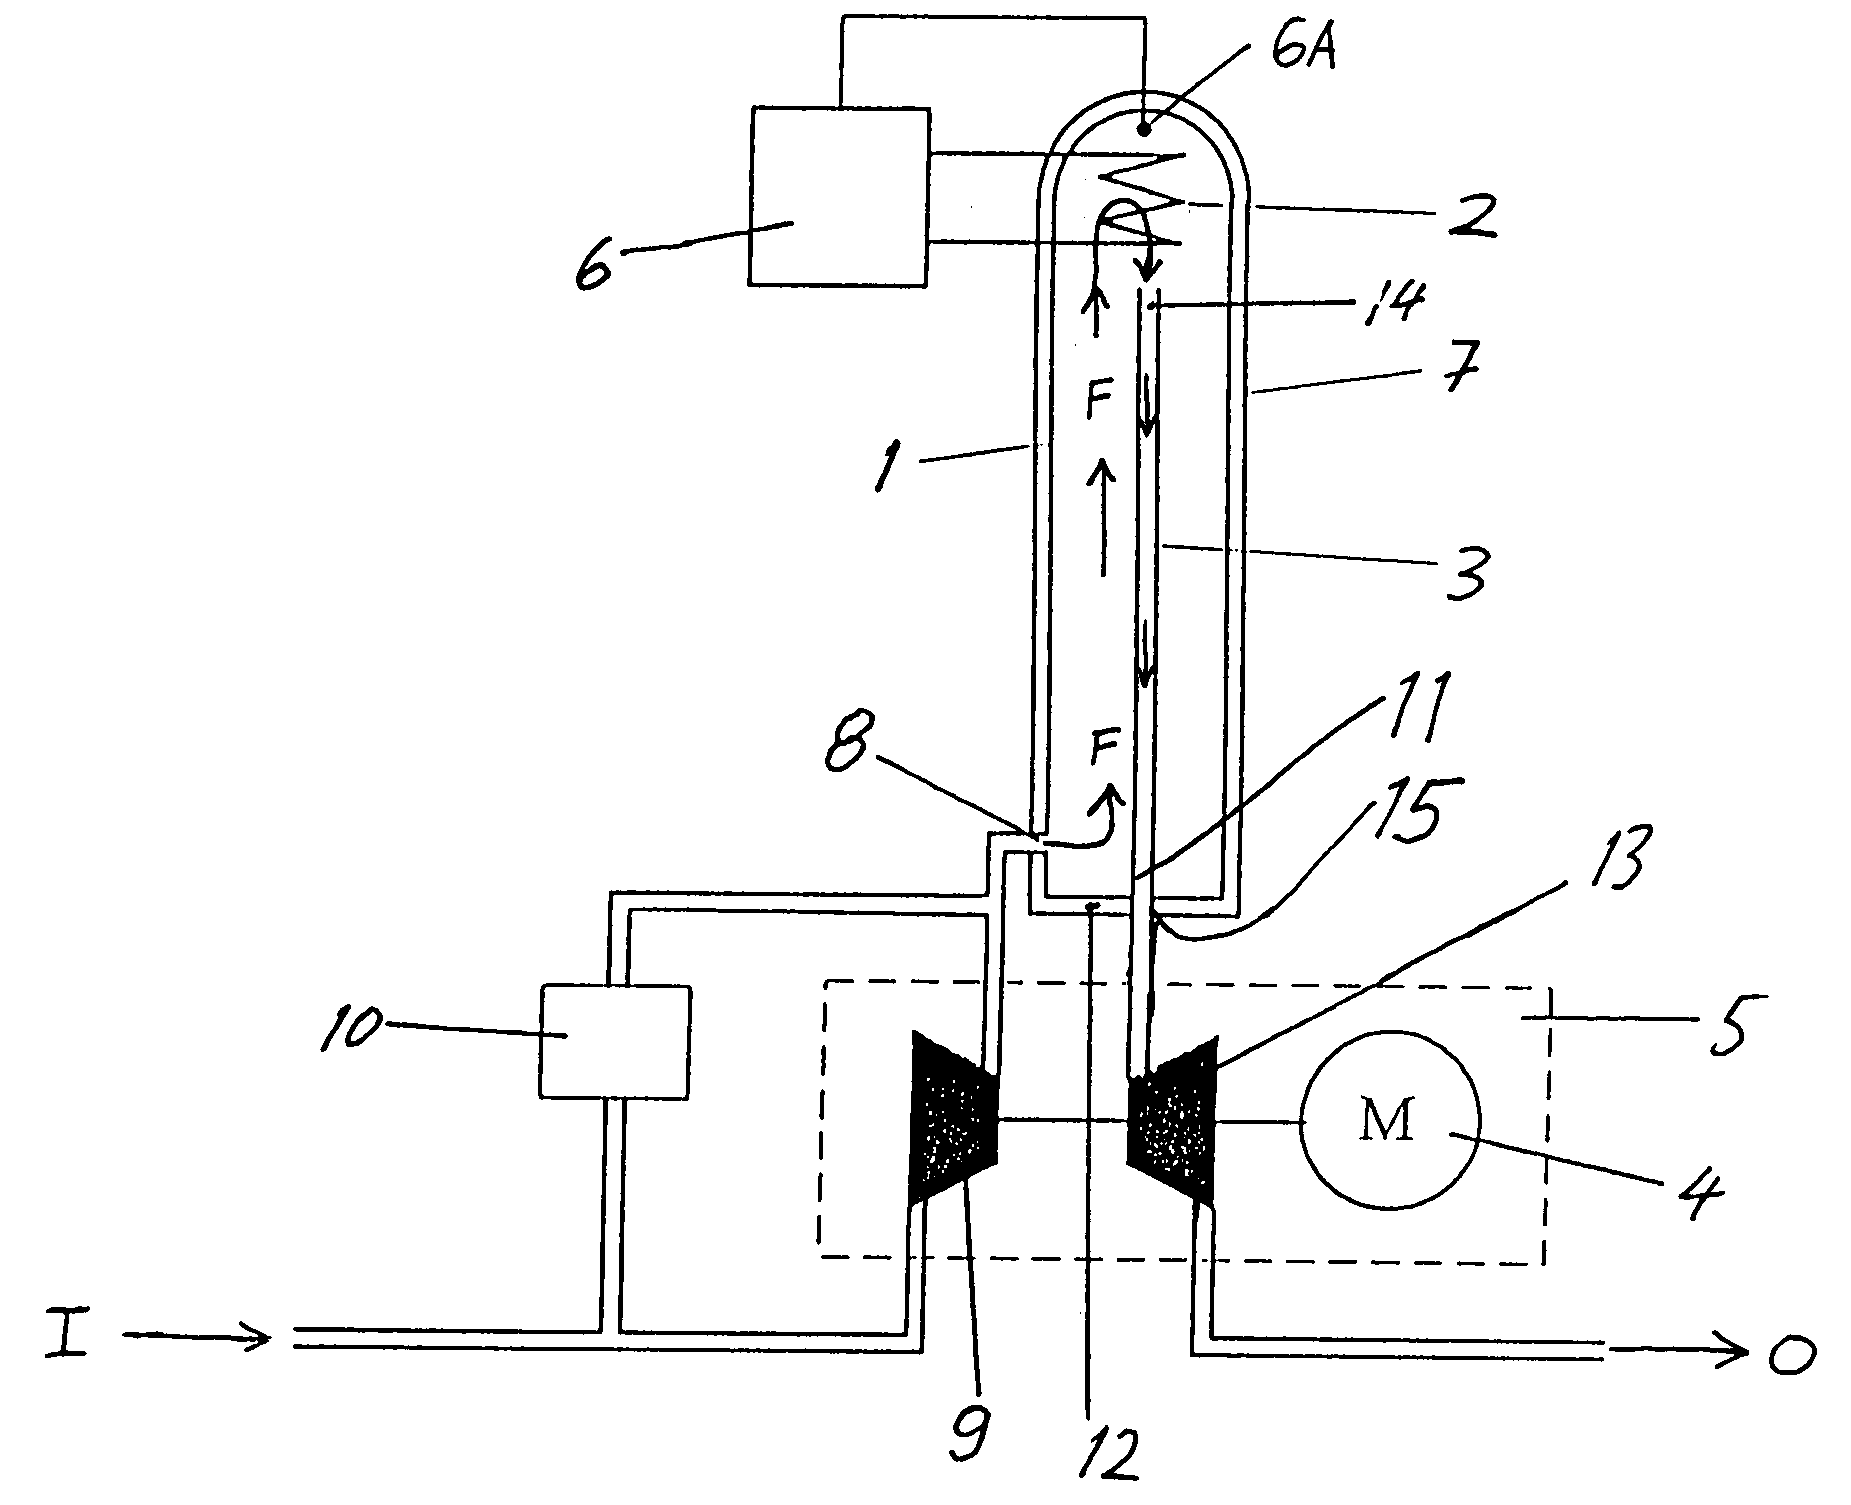 Apparatus and method for thermal sterilization of liquids